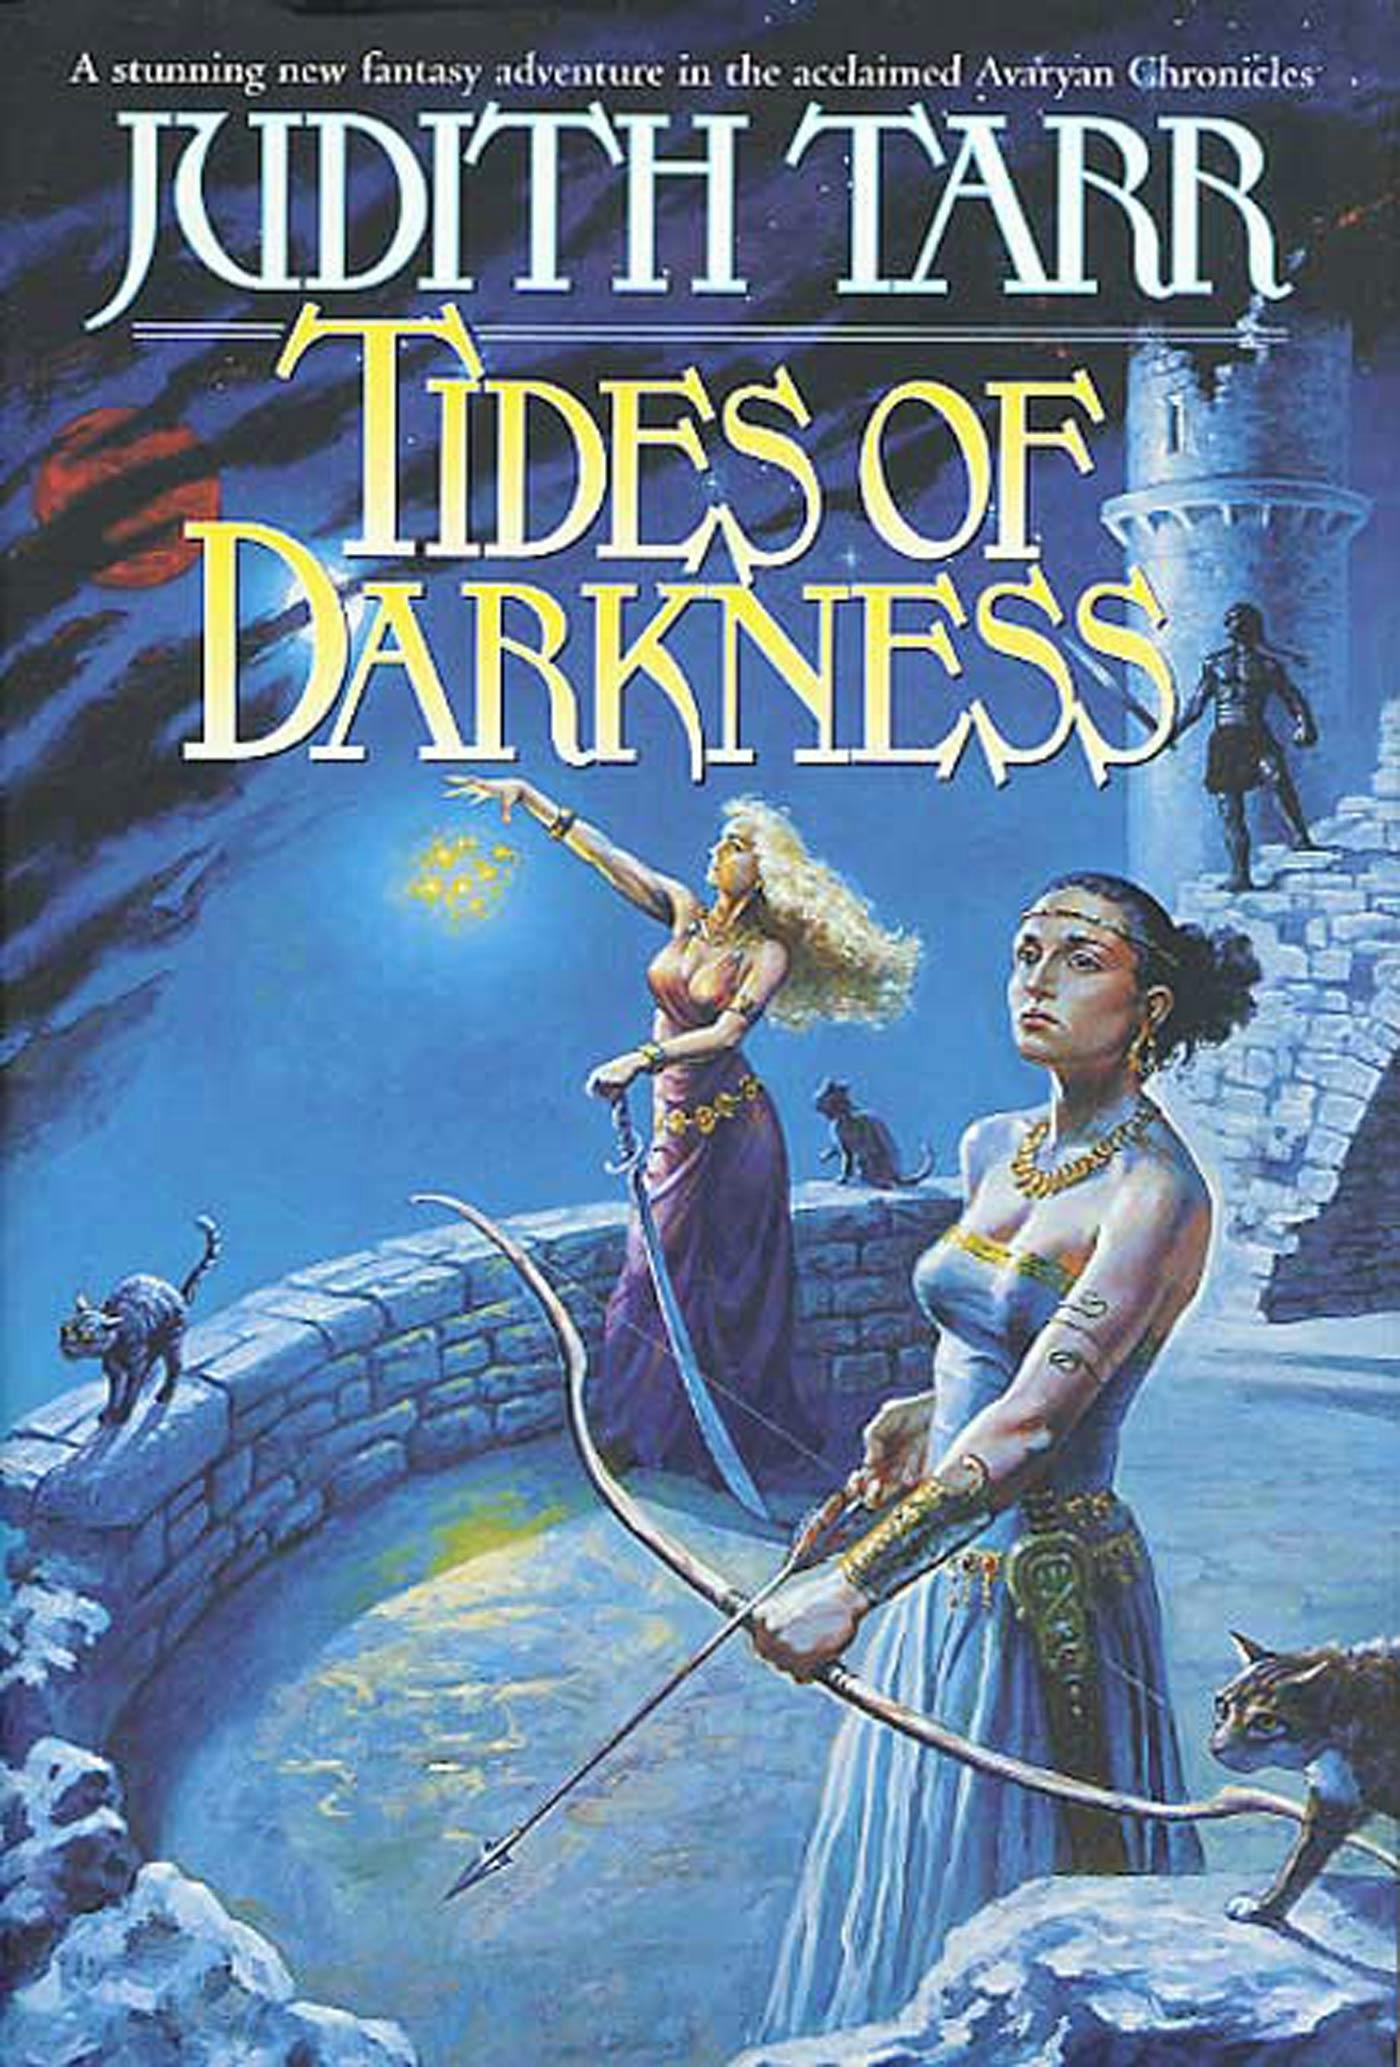 Cover for the book titled as: Tides of Darkness